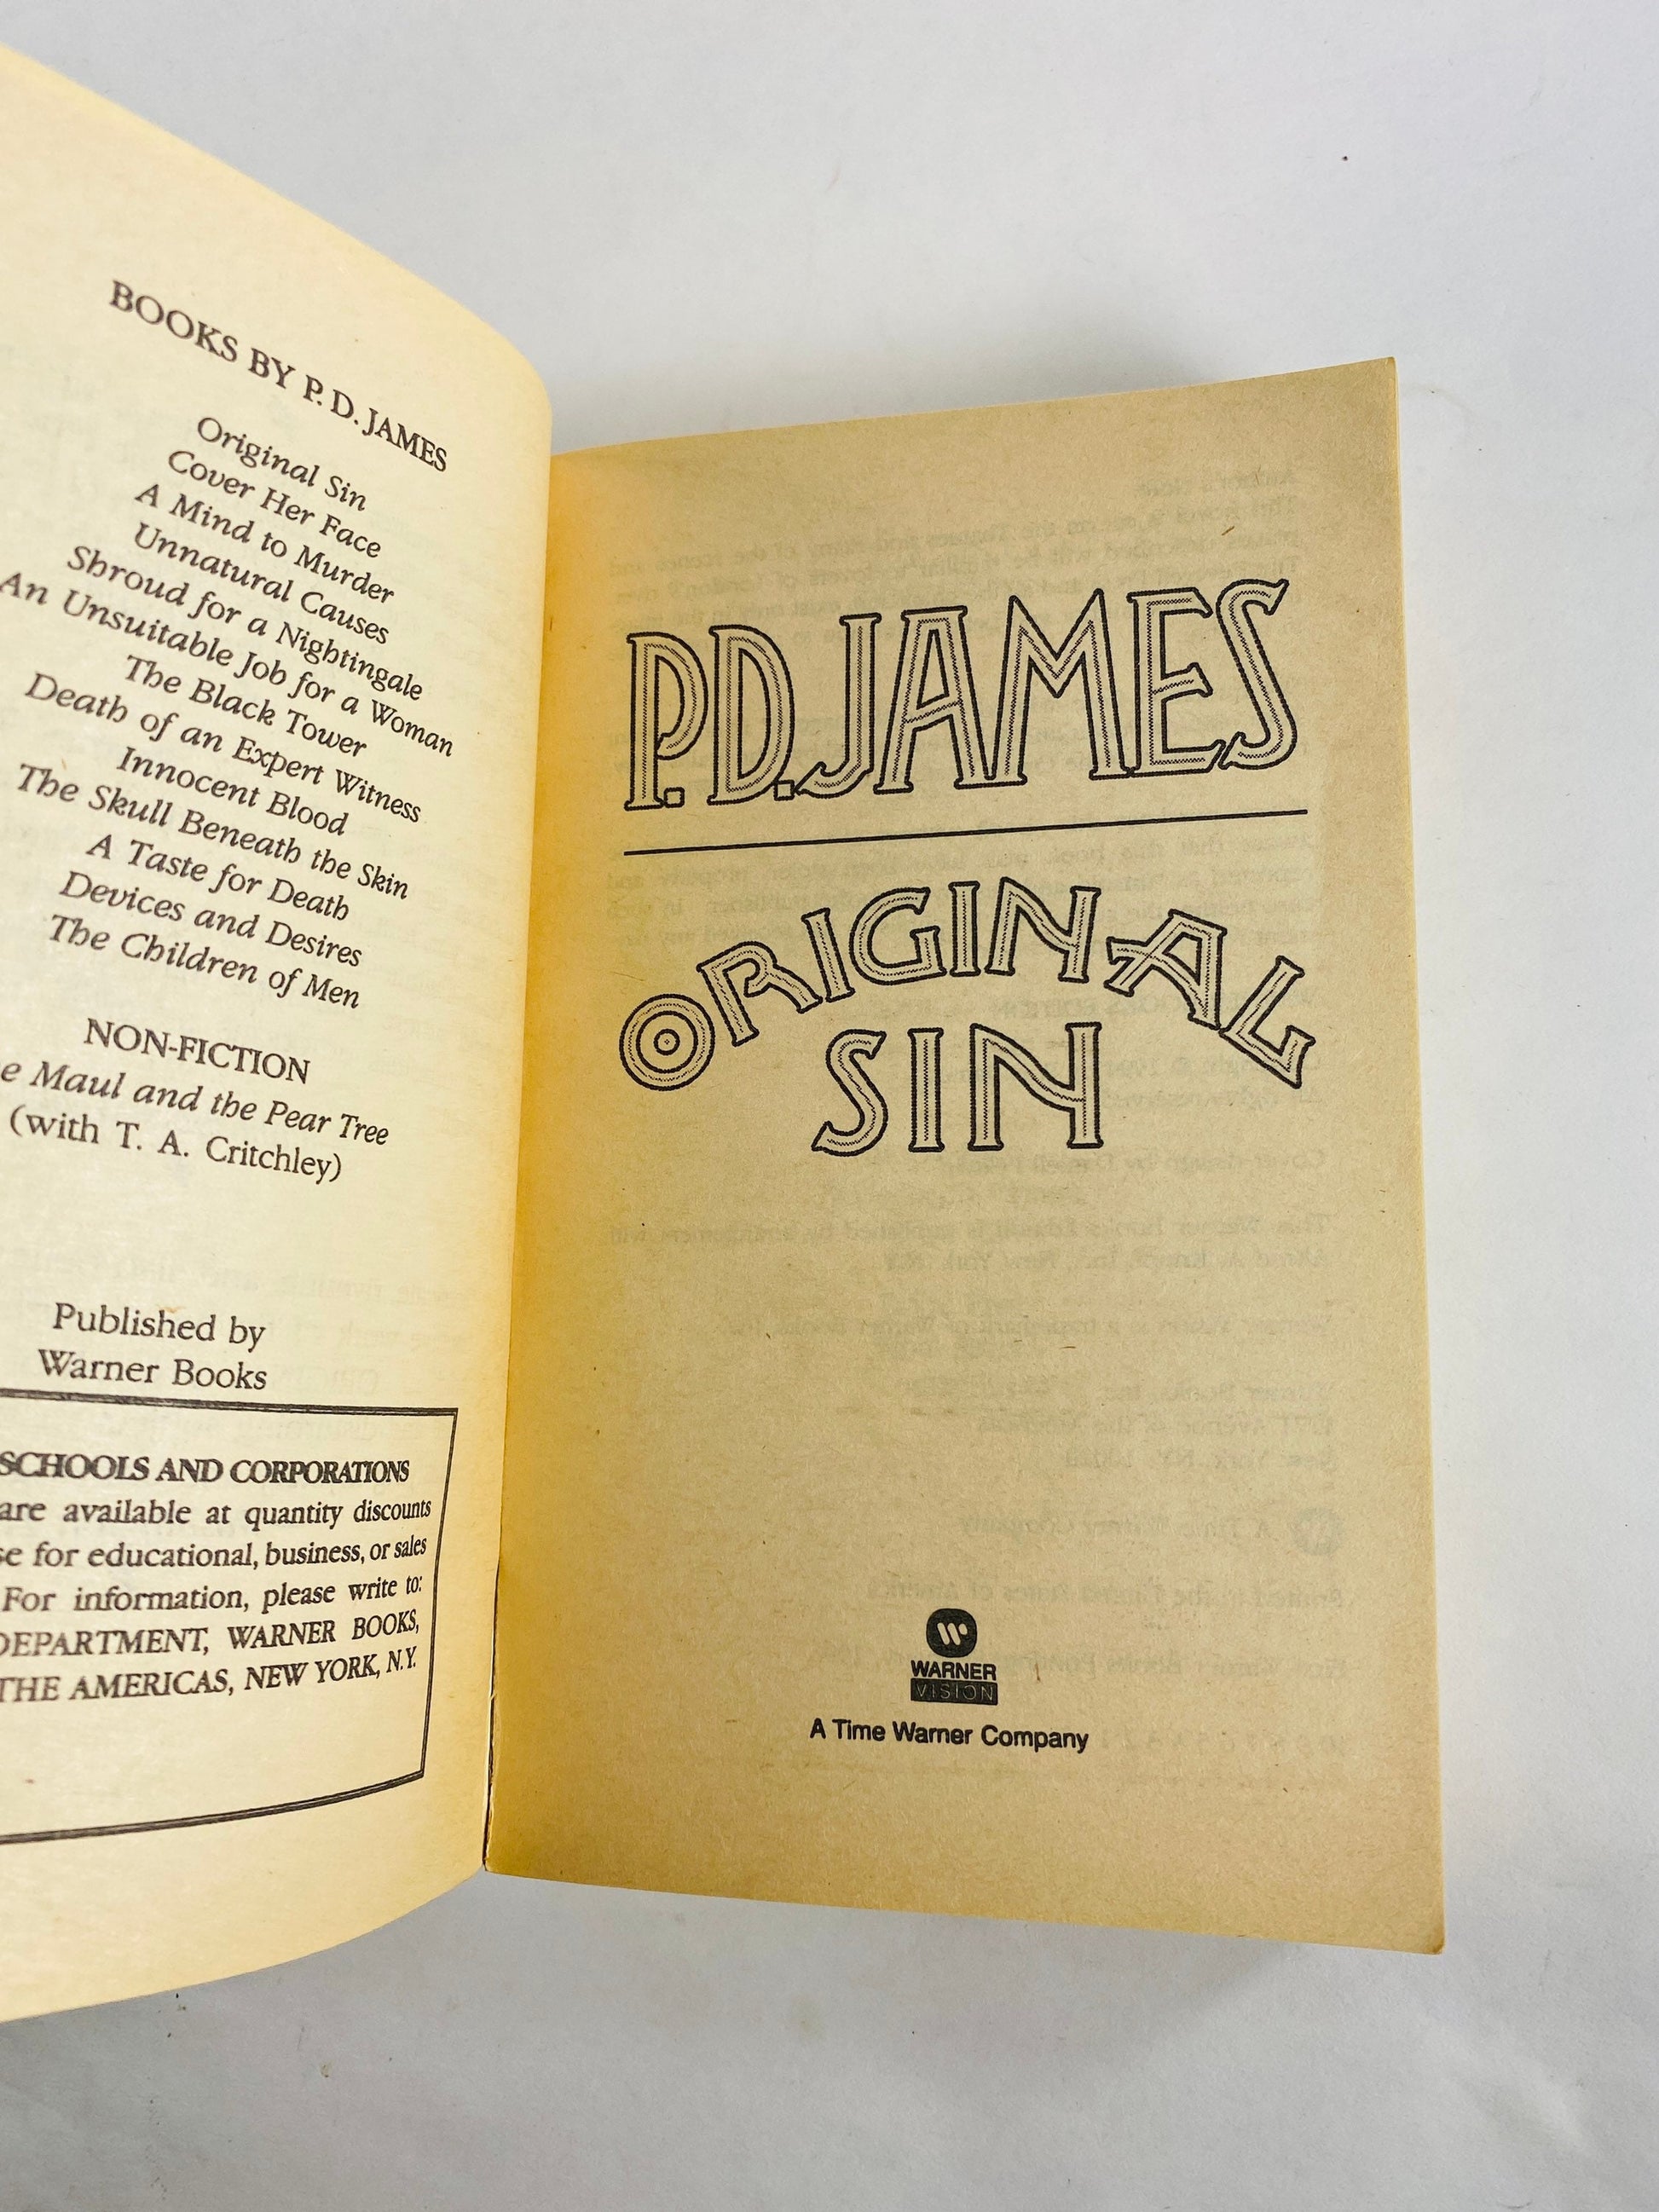 Original Sin by PD James vintage detective novel in the Adam Dalgliesh series FIRST printing paperback book circa 1996.